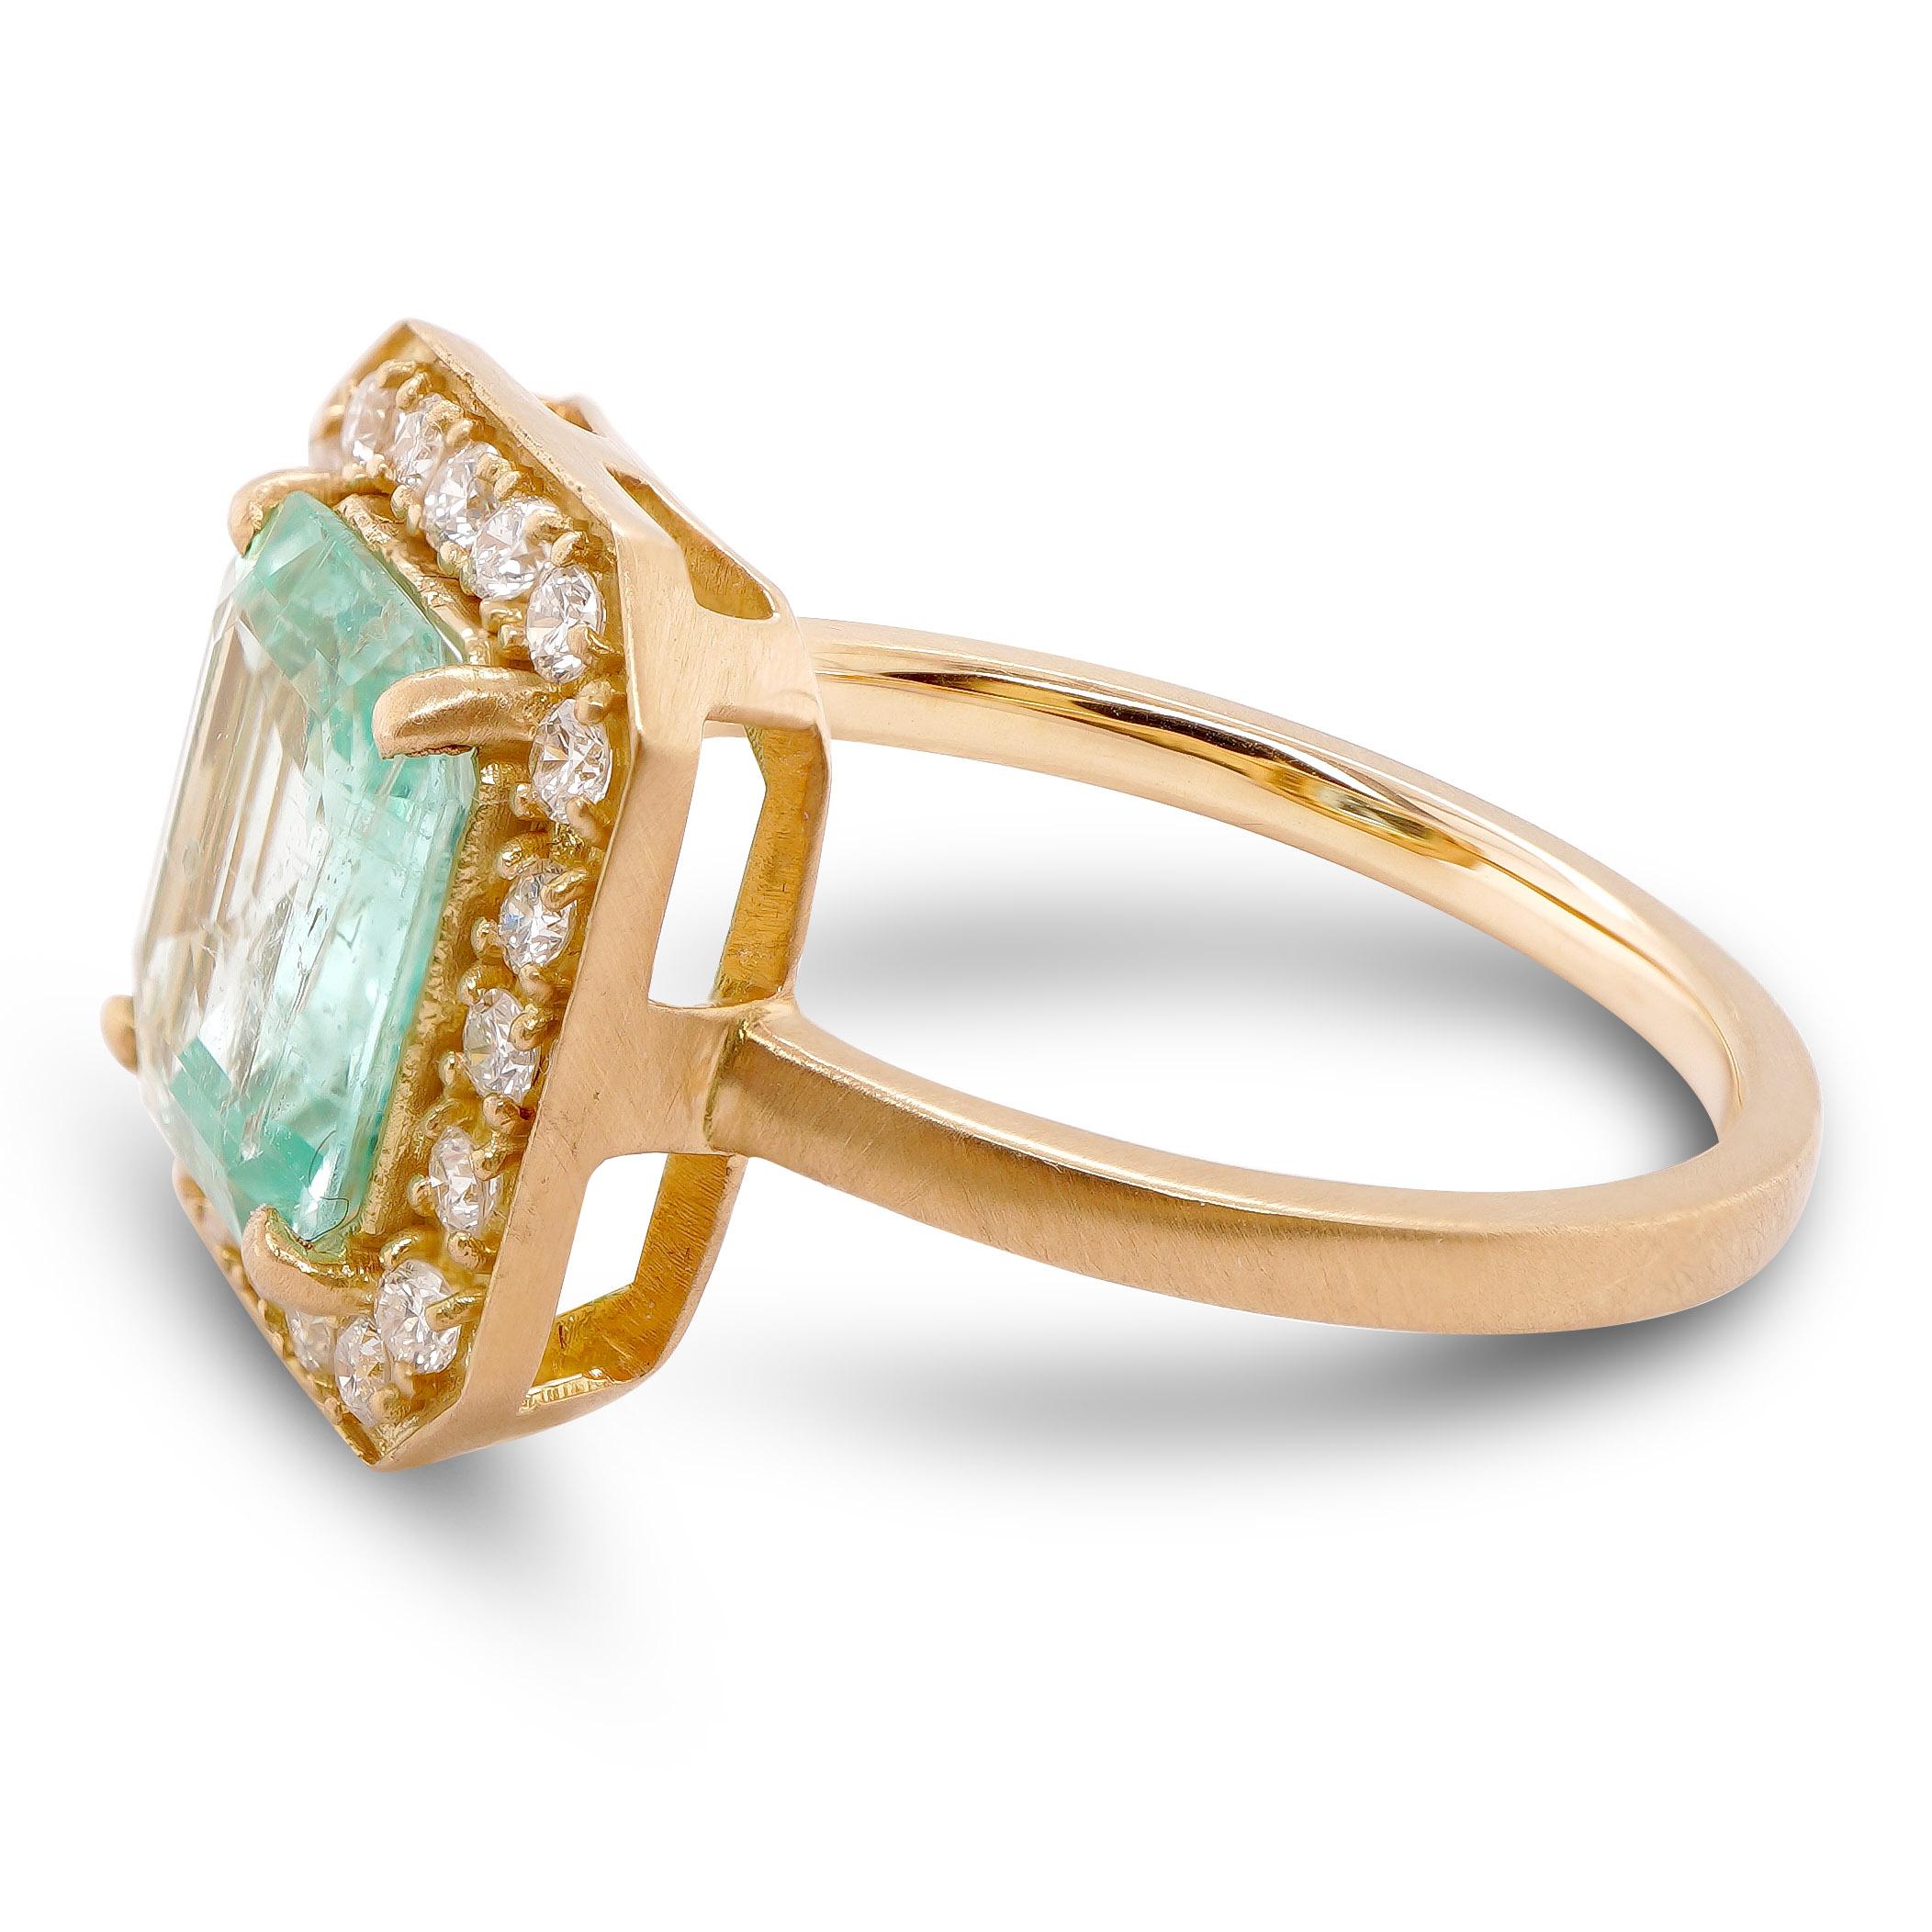 A smooth shade of pastel colored emerald weighing 1.78 carat is set along with 0.28 carats of white round brilliant diamond in this beautiful solitaire 18K Gold ring.

The details of the diamond are mentioned below:
Color: F
Clarity: VS
